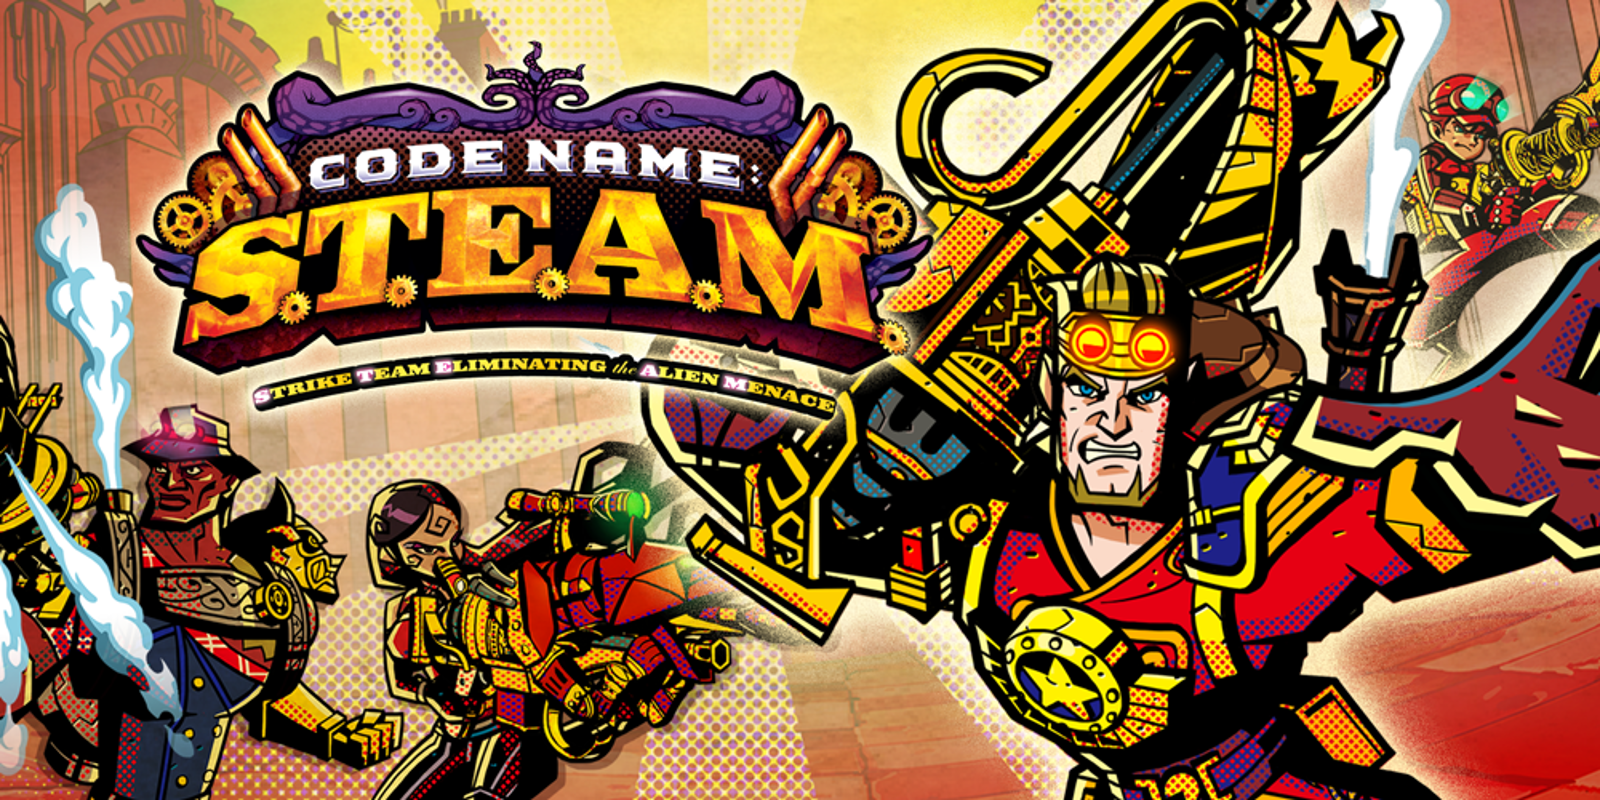 SI_3DS_CodenameSTEAM_image1600w.png